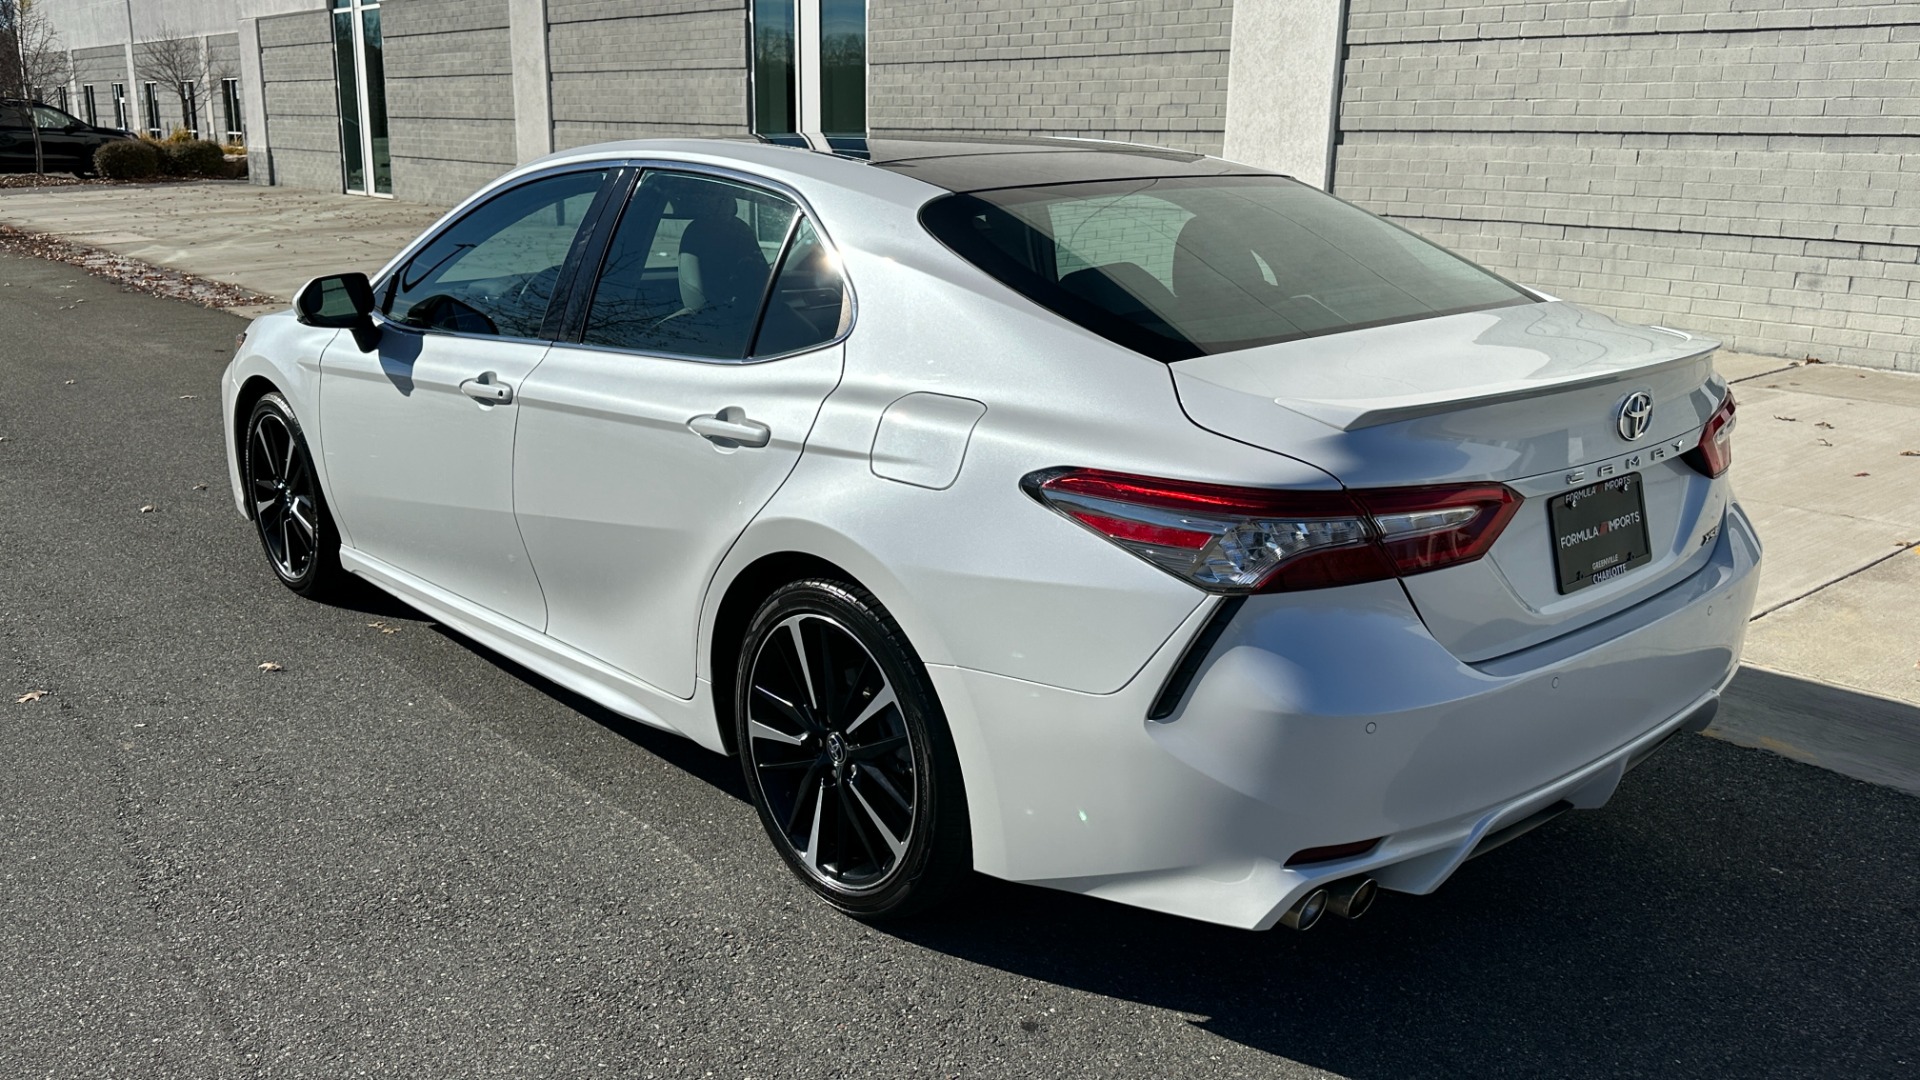 Used 2018 Toyota Camry XSE / PANORAMIC ROOF / ENTUNE / HEATED SEATS / BACKUP CAMERA for sale $23,999 at Formula Imports in Charlotte NC 28227 4